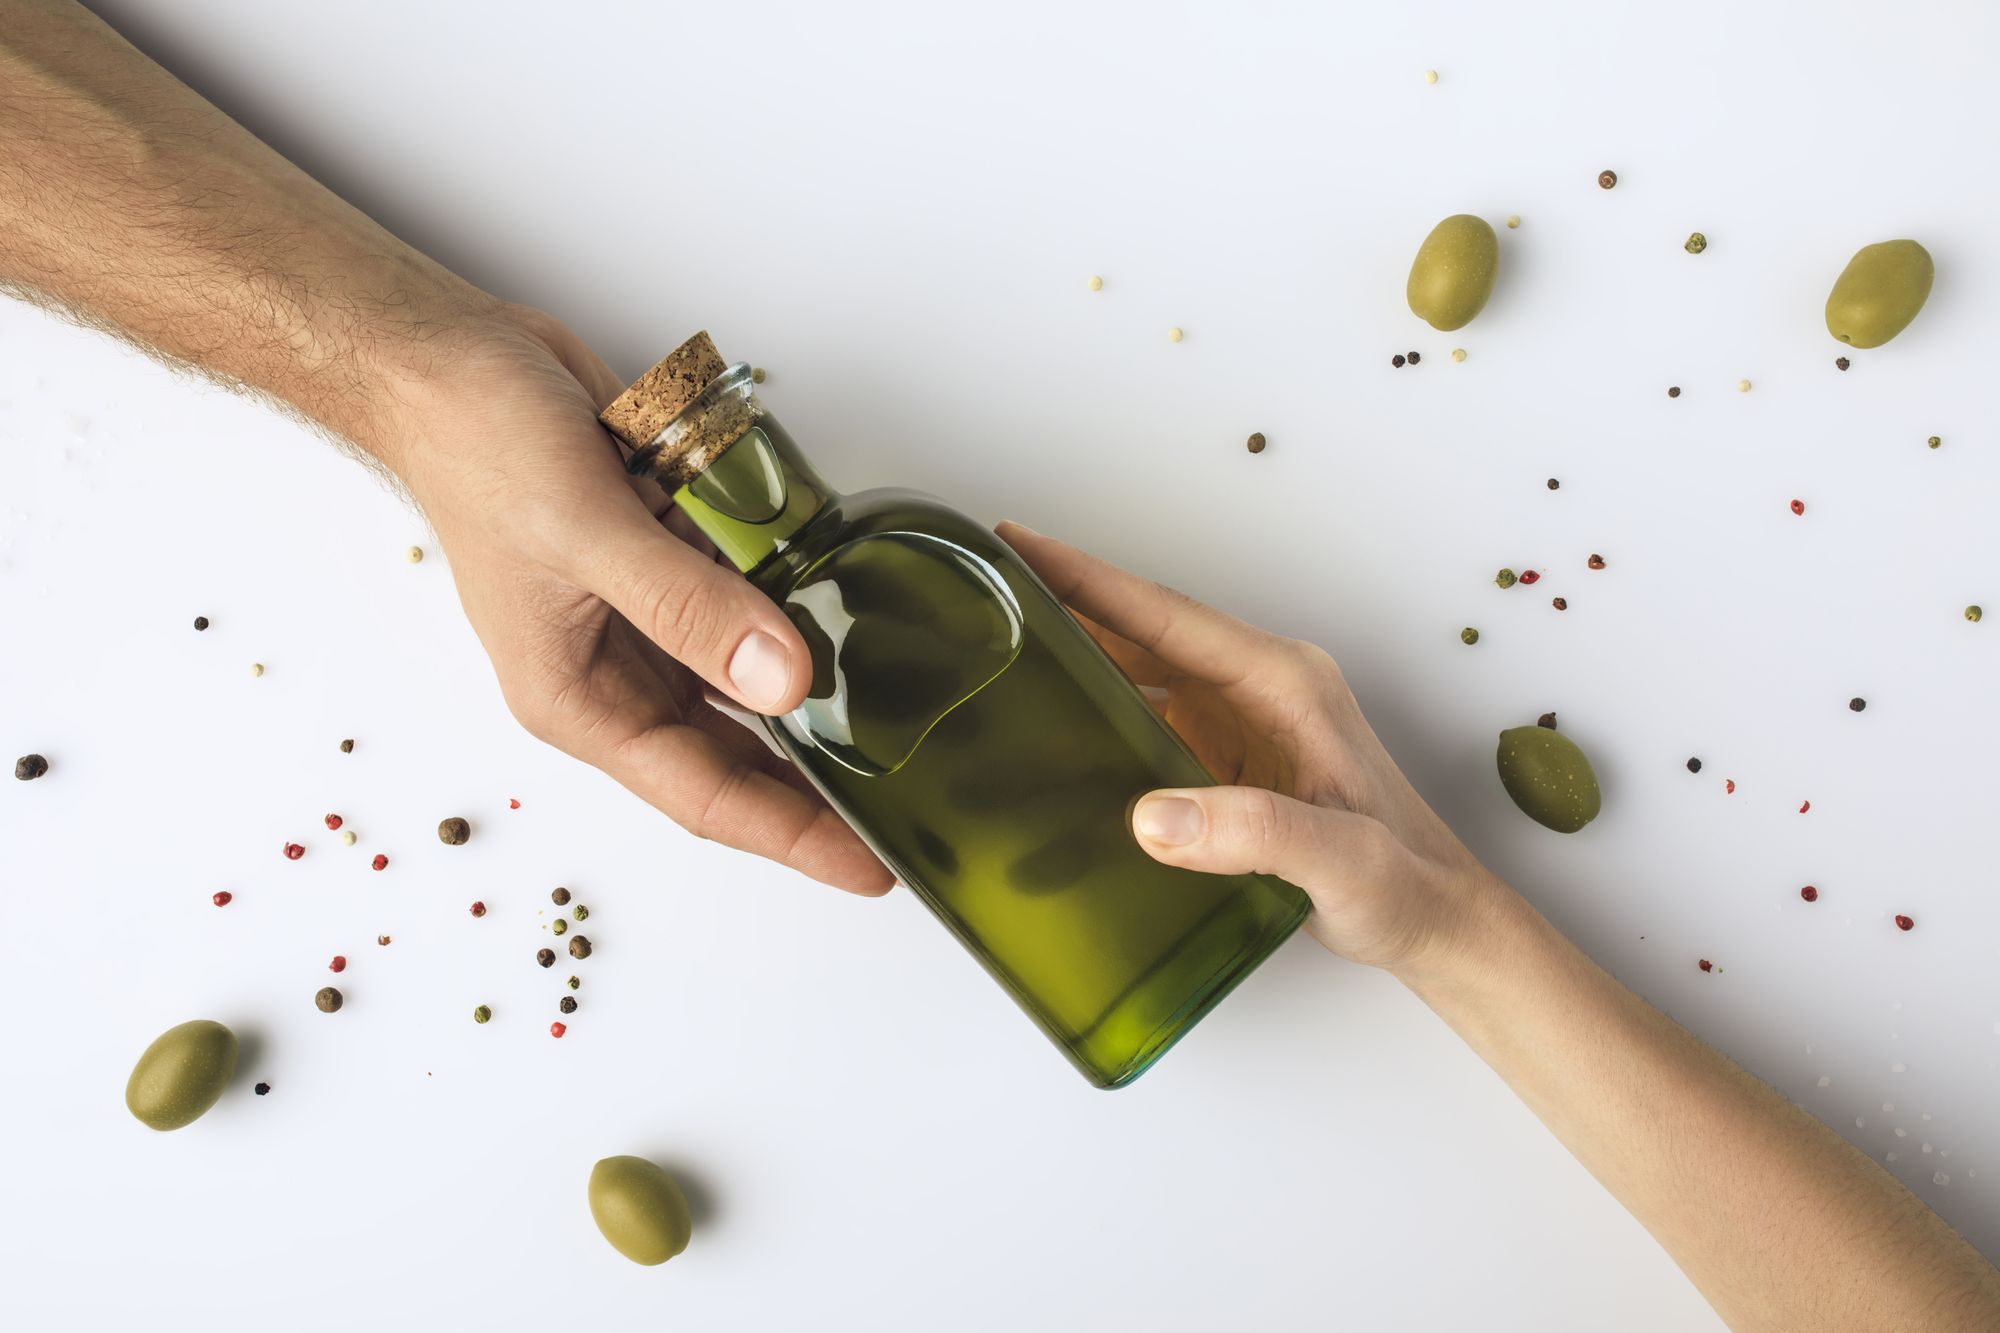 Extra virgin olive oil can help with weight loss and lower blood